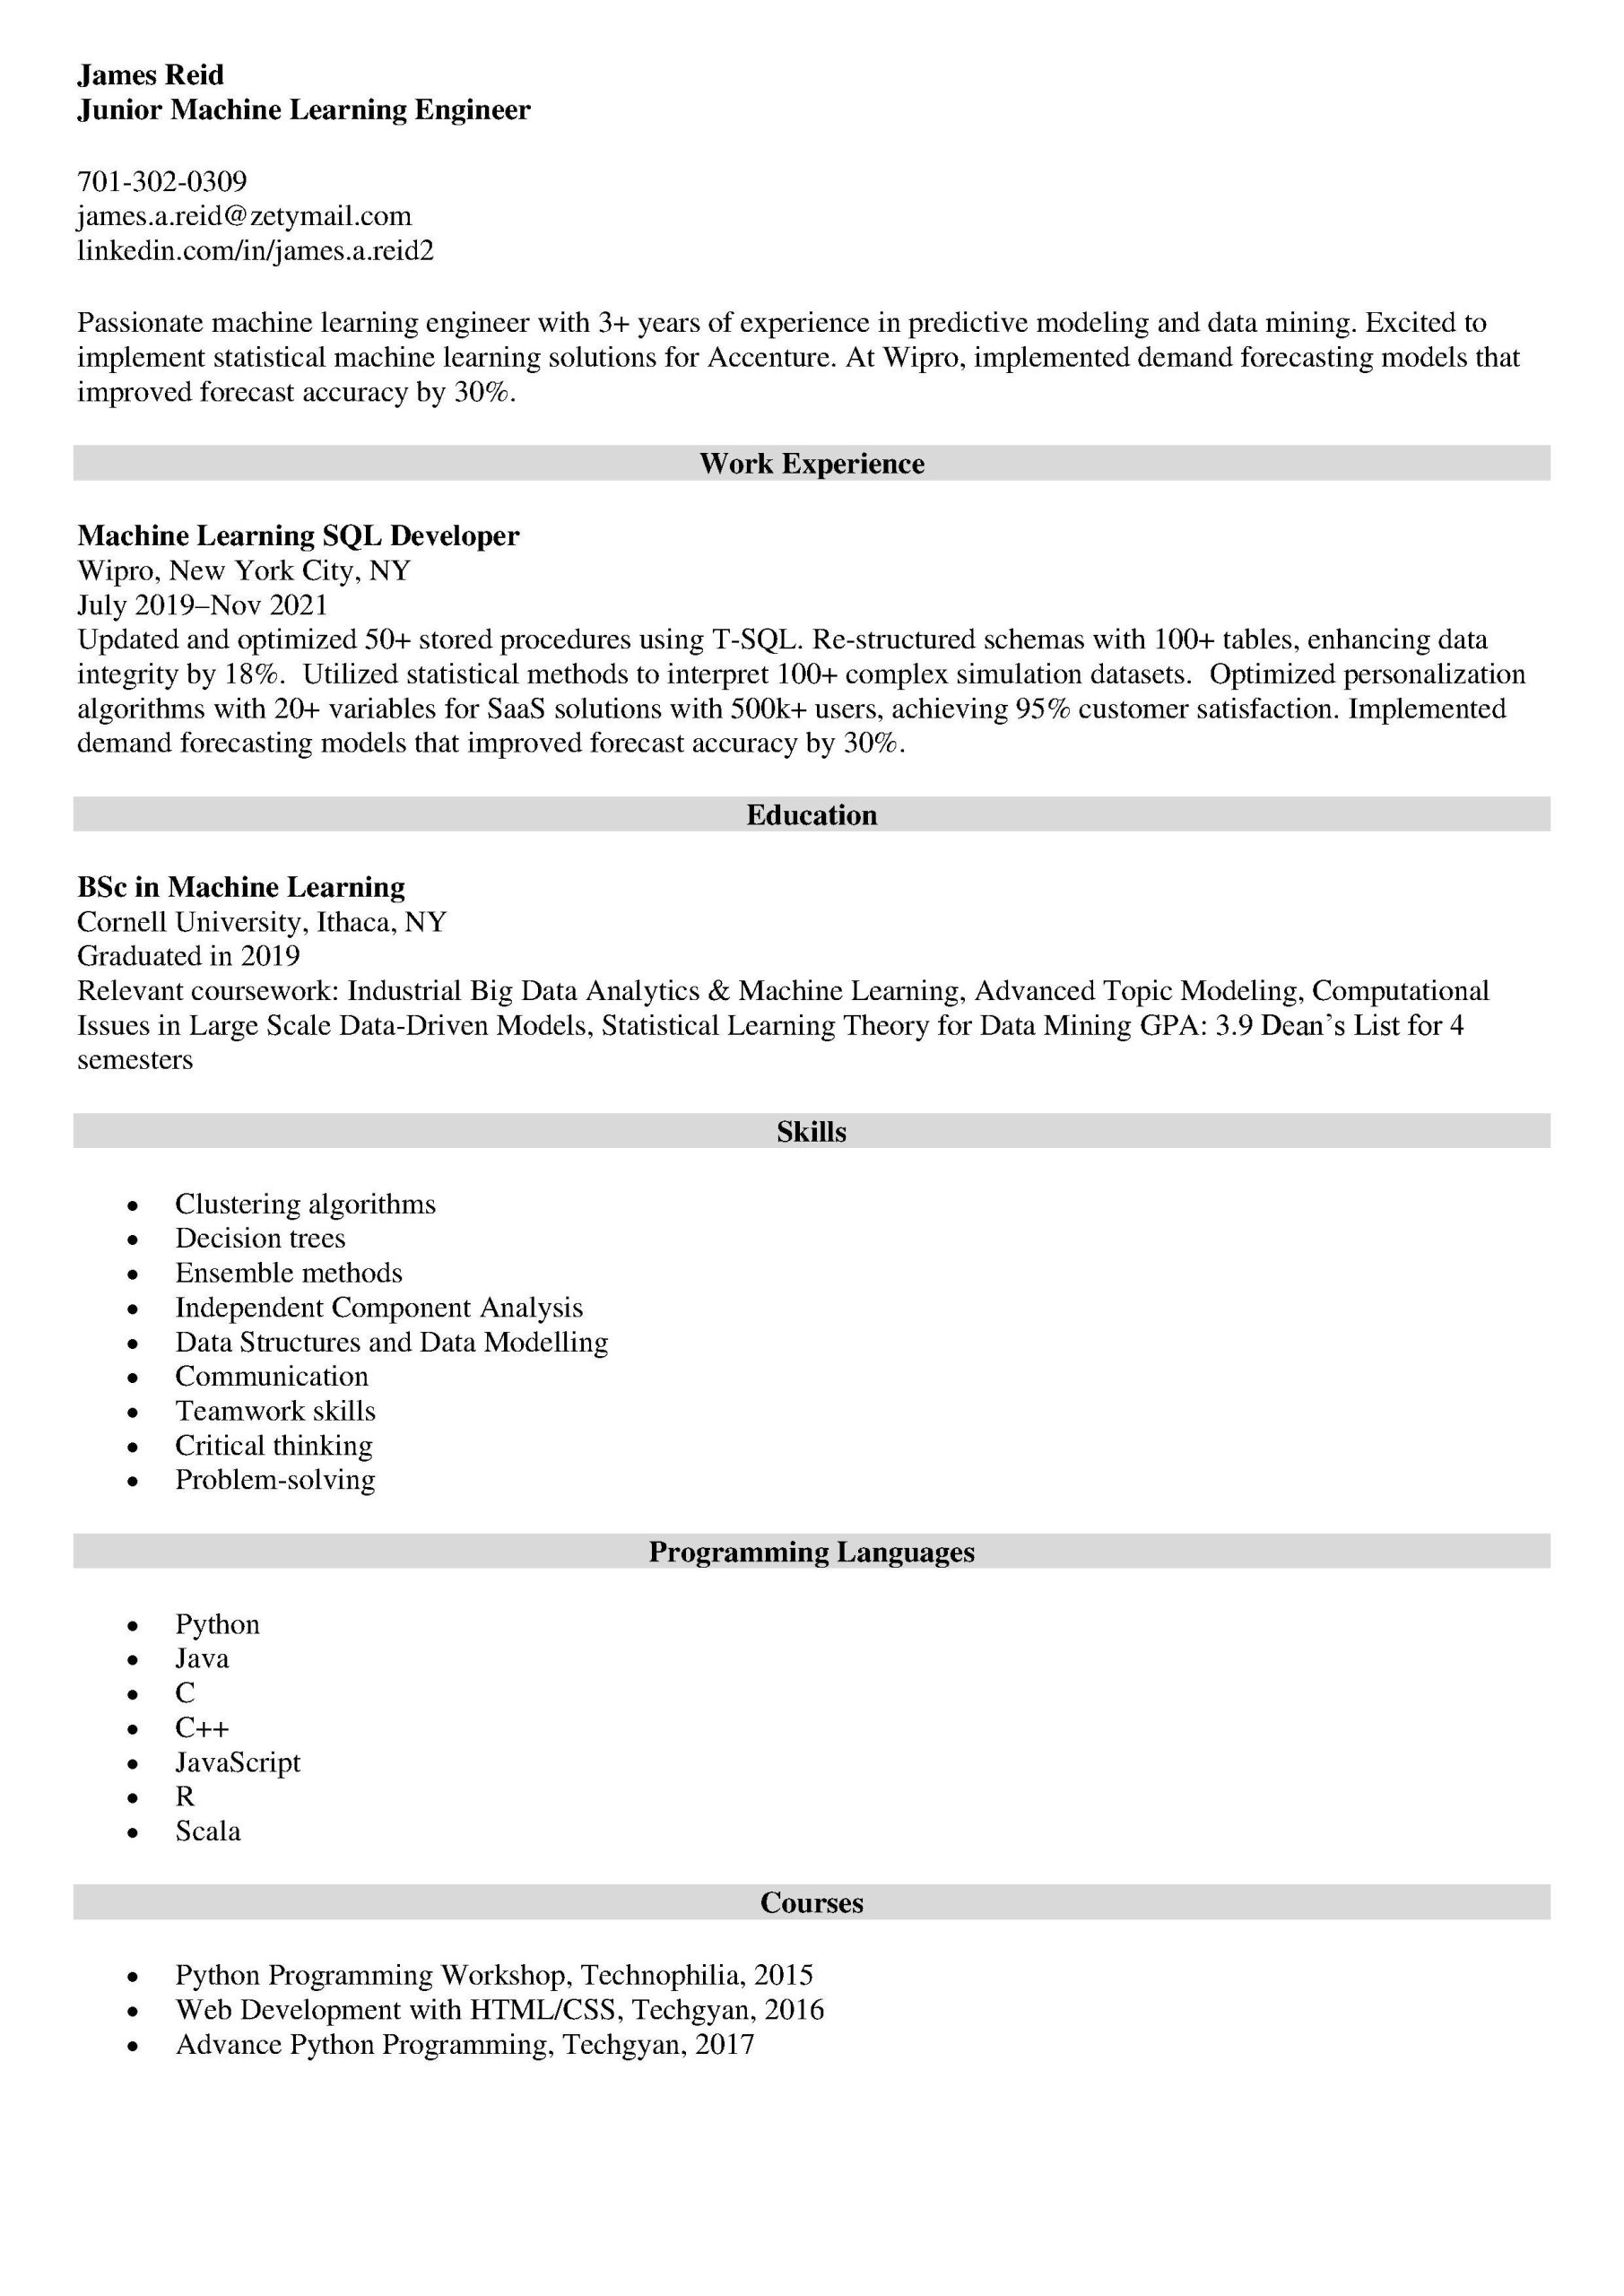 Resume Samples with Links or Url How to Put Linkedin On A Resume (examples & Guide)